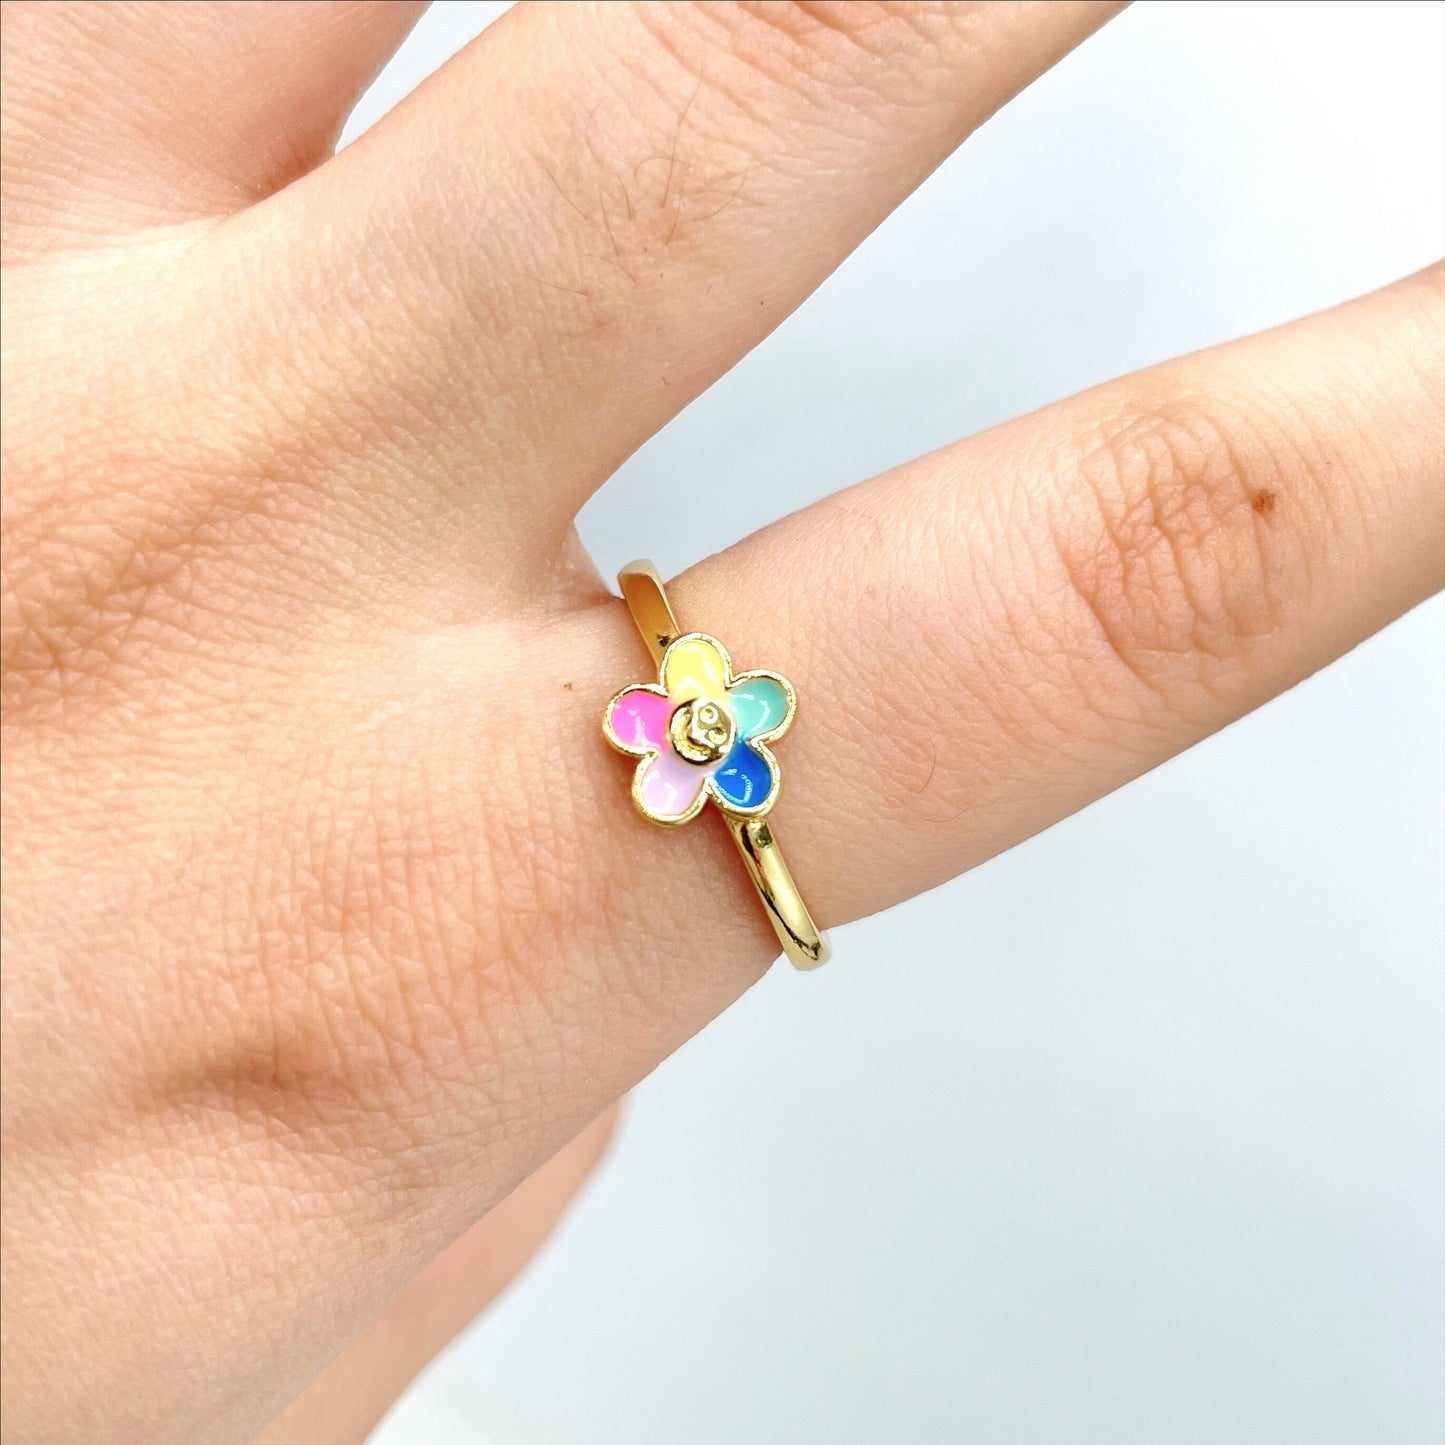 18k Gold Filled Colored Enamel Smile Happy Funny Face Flower, Yellow, Green, Blue, Pink & Purple Adjustable Ring, Wholesale Jewelry Supplies